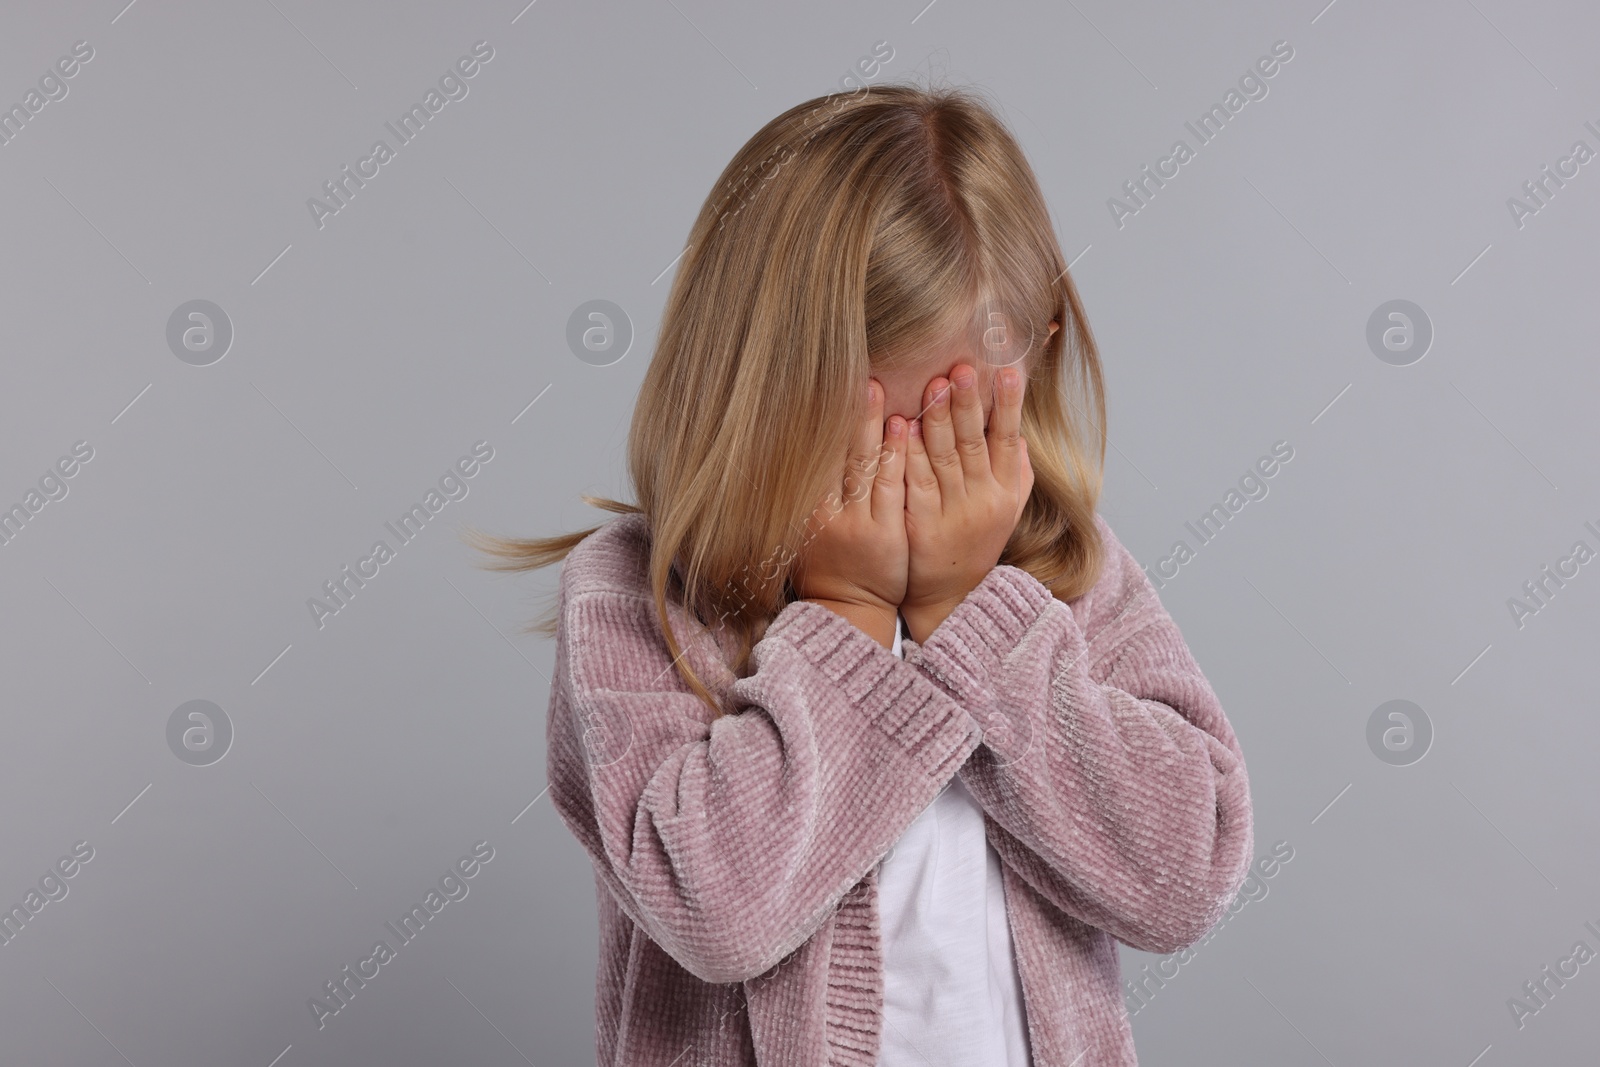 Photo of Resentful girl covering face with hands on grey background